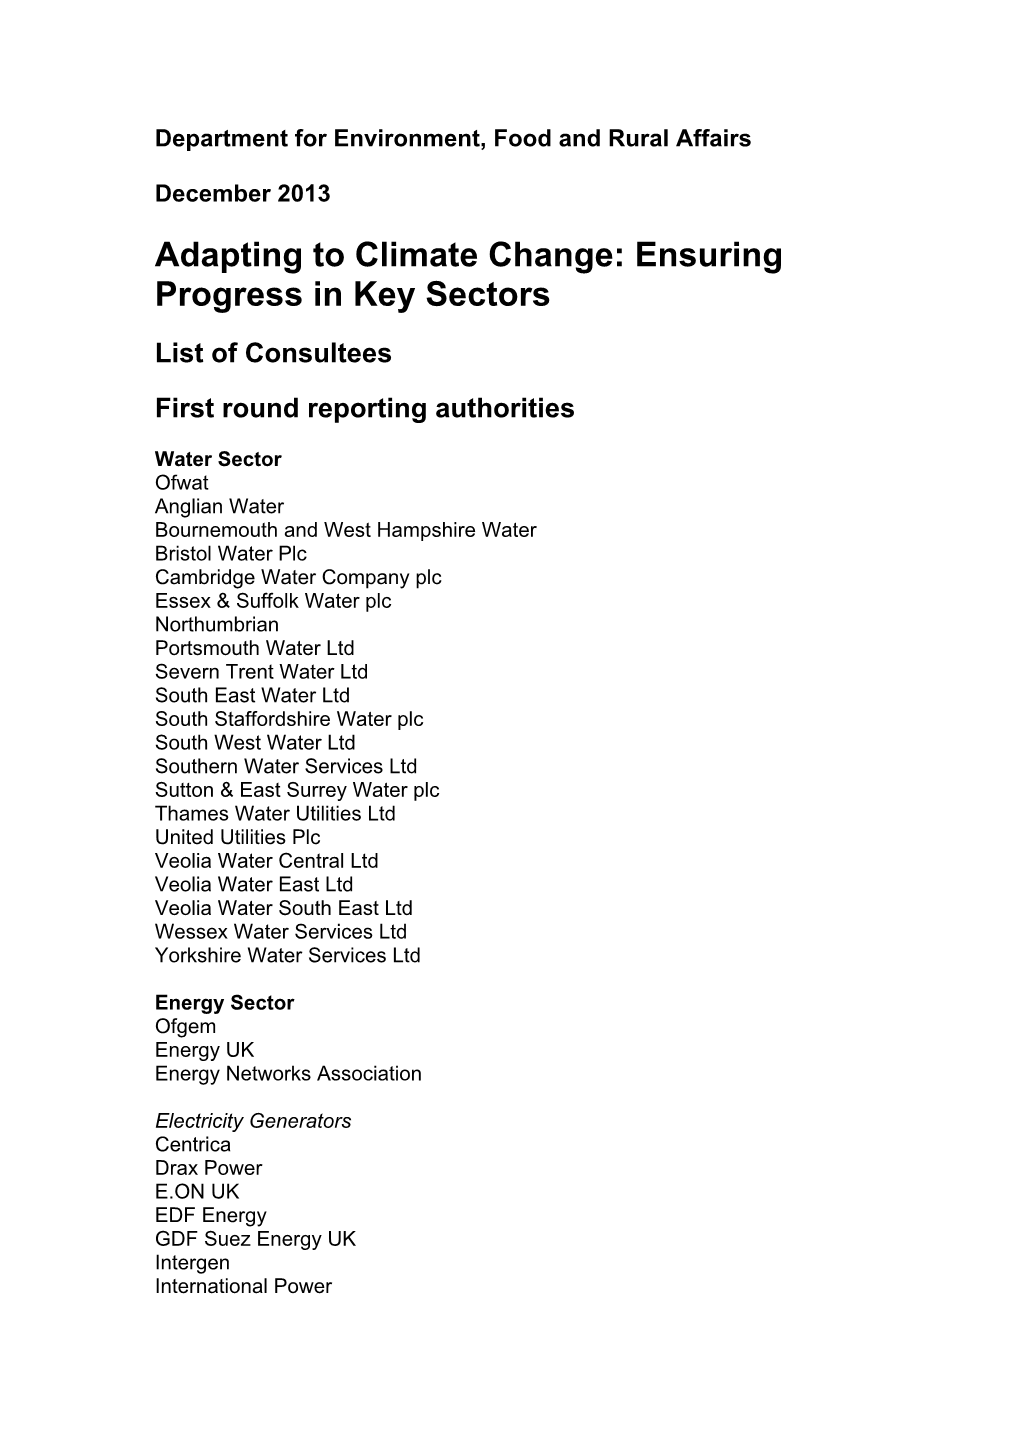 Adapting to Climate Change: Ensuring Progress in Key Sectors